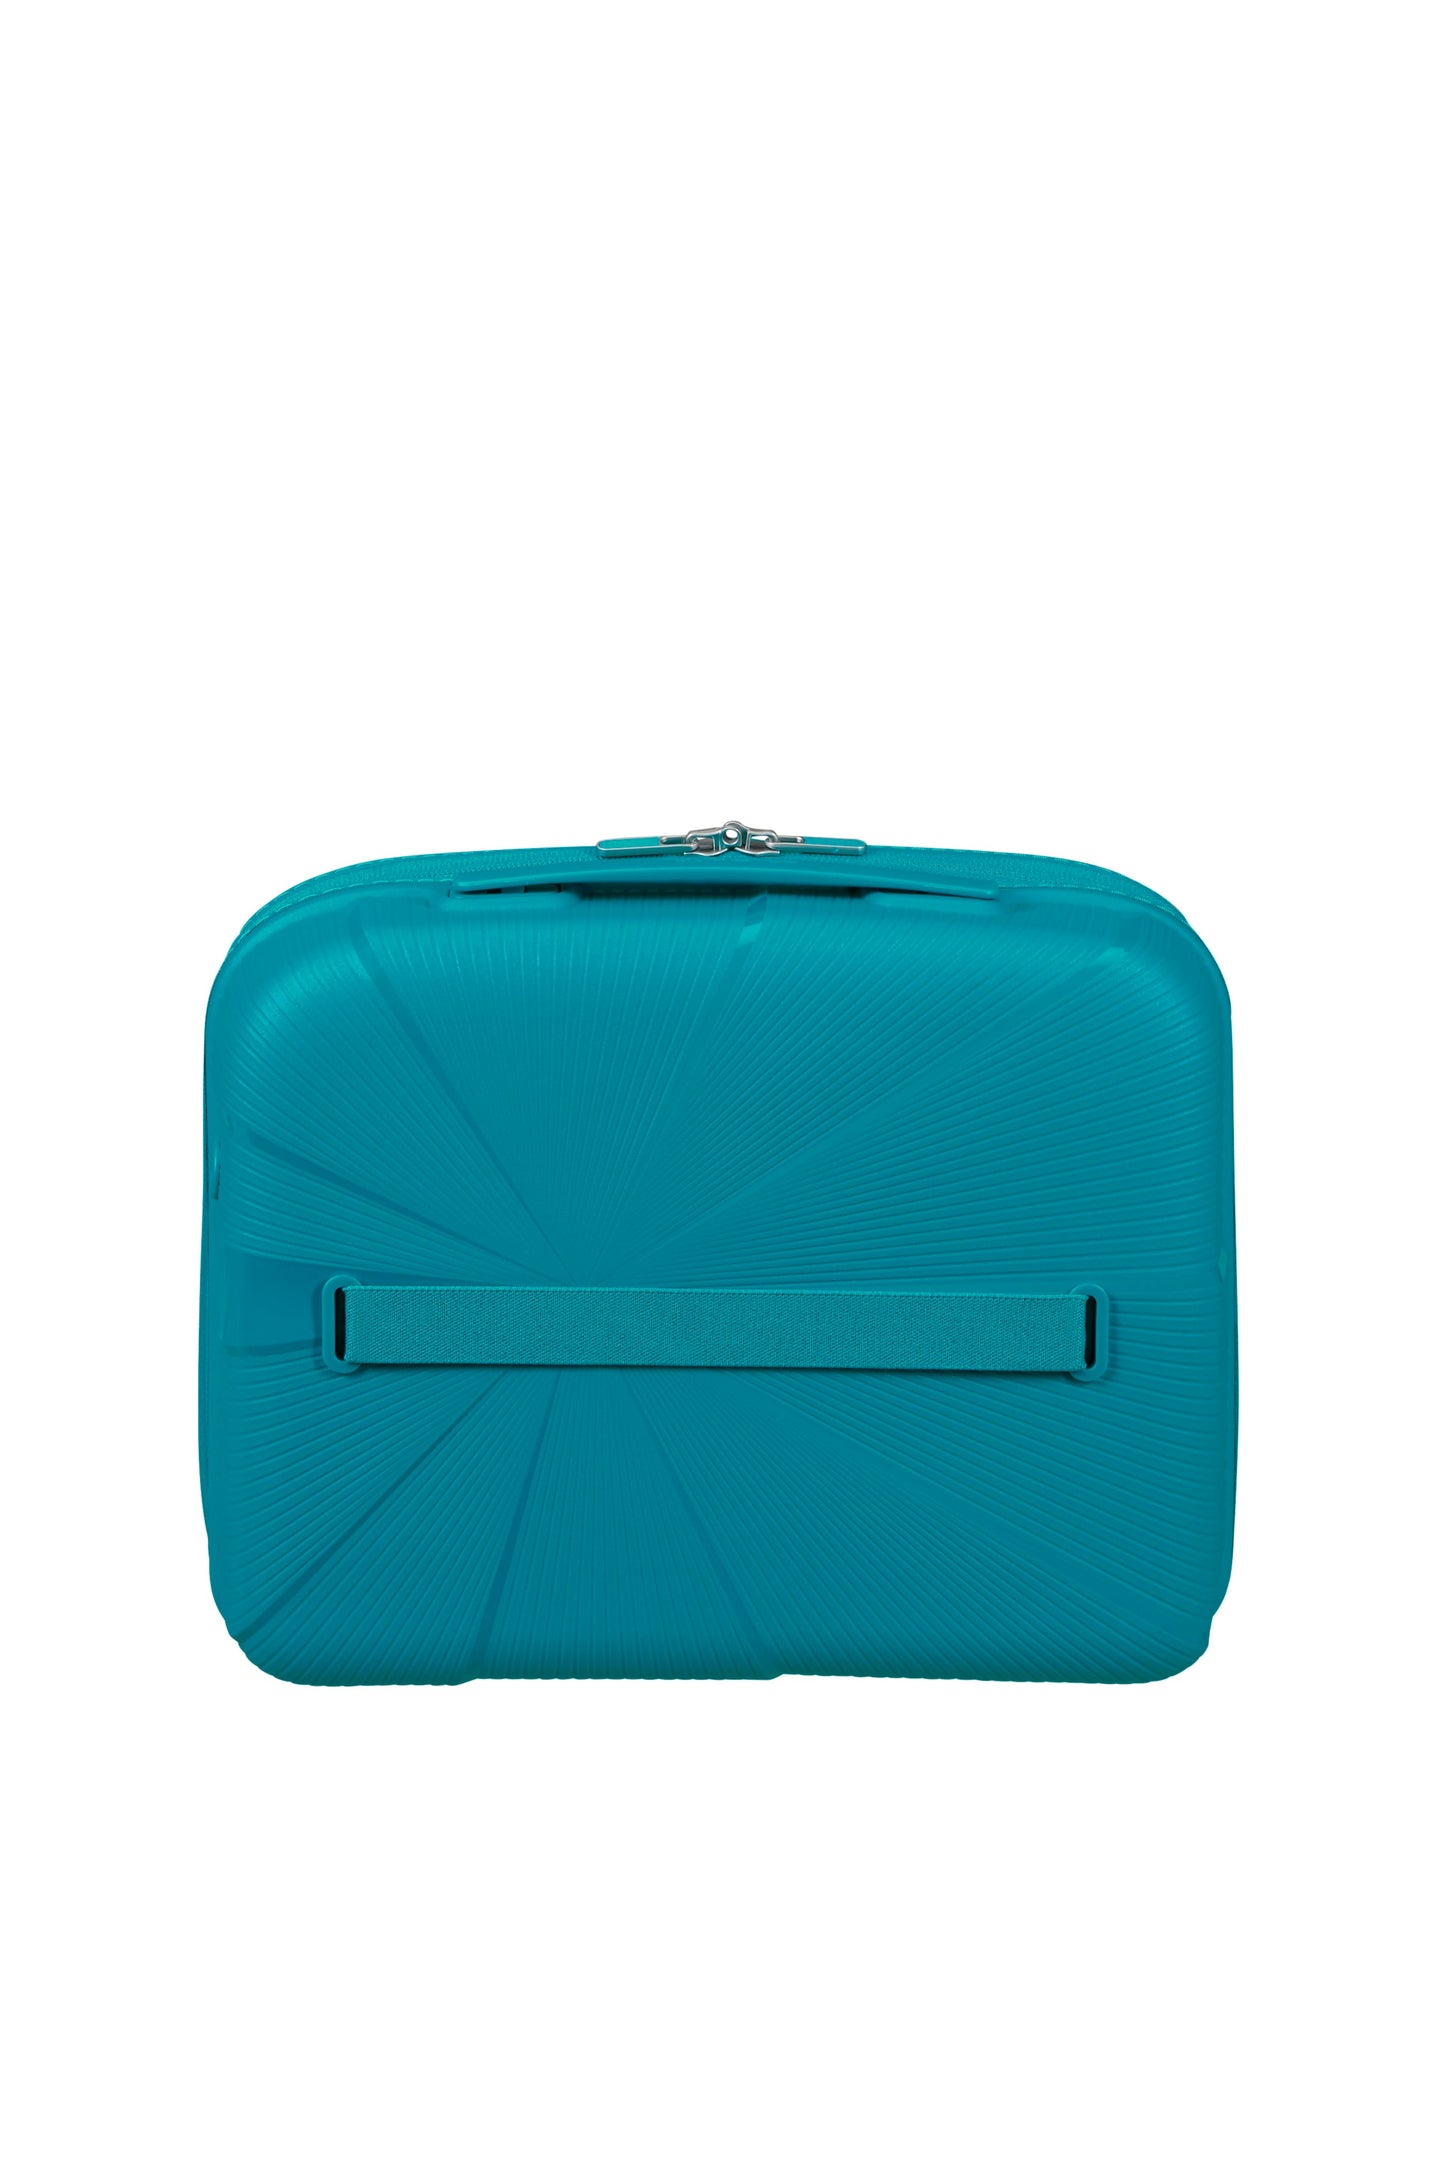 STARVIBE Beauty Case von American Tourister - Laure Bags and Travel